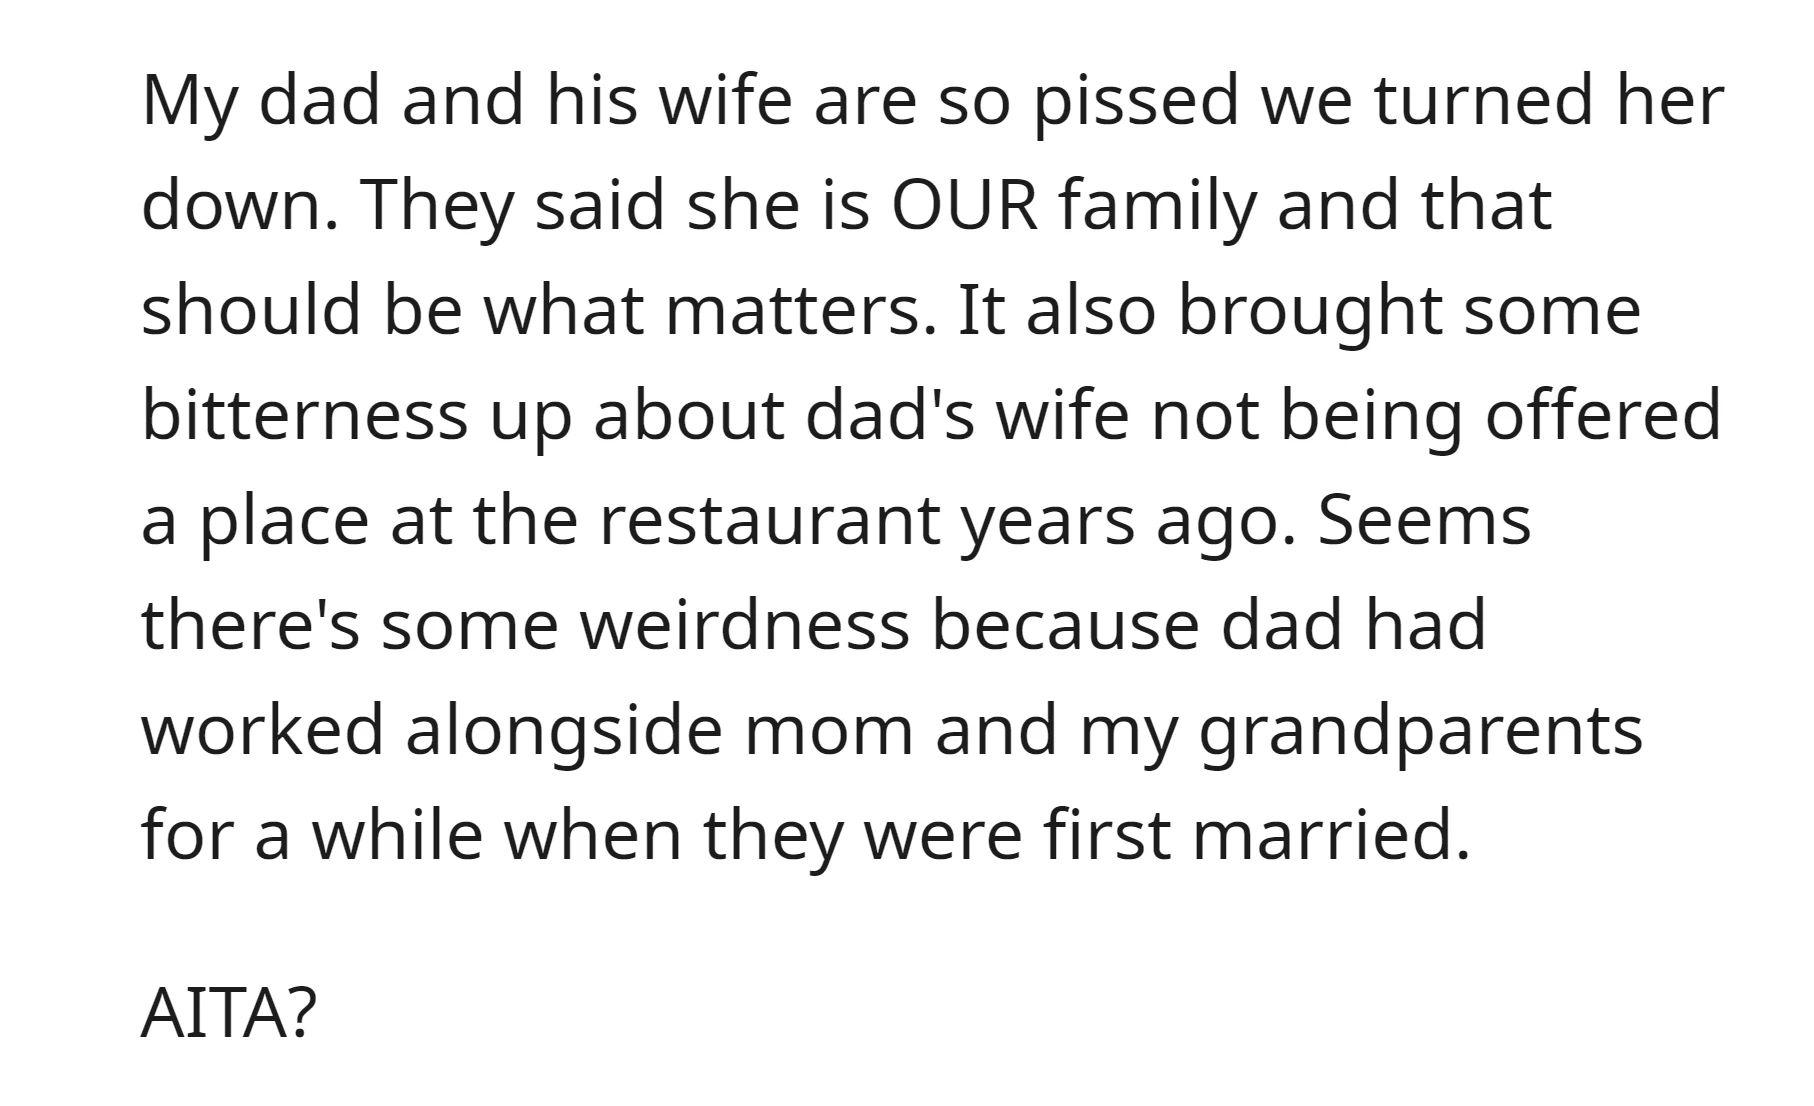 Their dad and his wife argued that she was part of the family